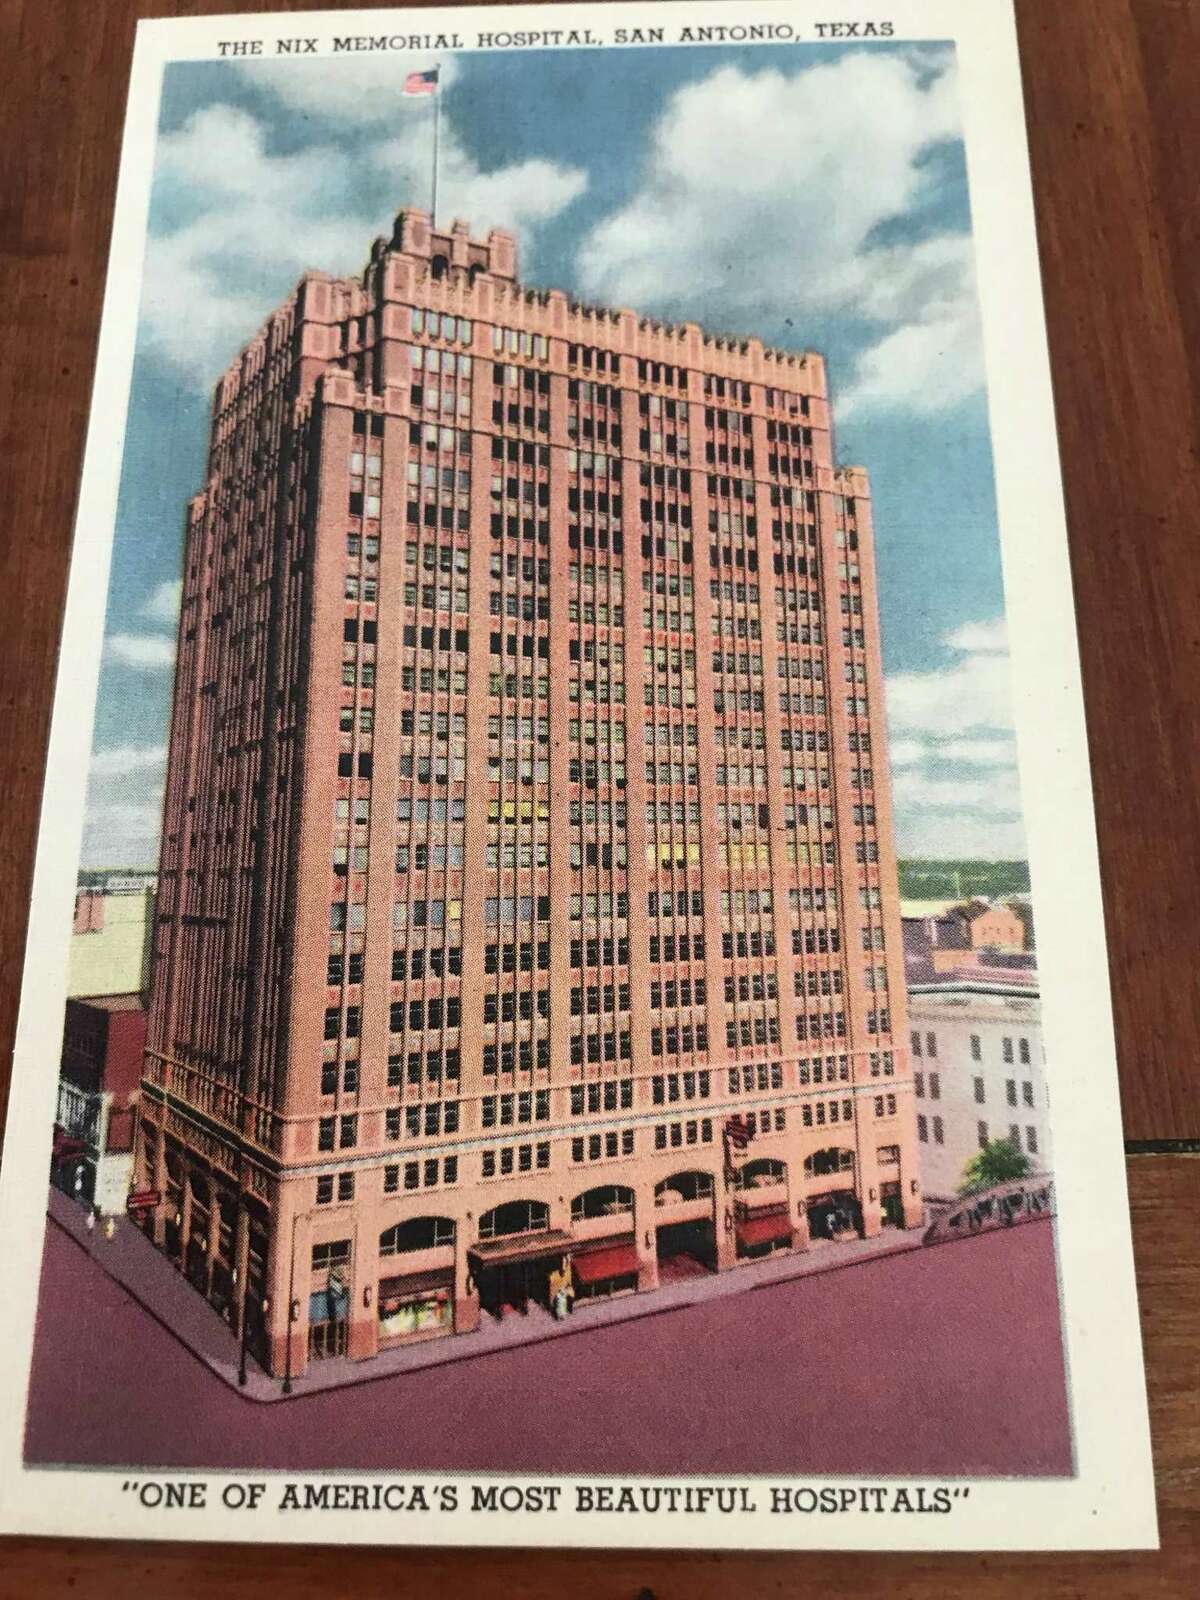 Nancy Avellar, who was born in the Nix Hospital in 1953, has a postcard she believes was placed in patient rooms (“like at a Holiday Inn,” she said). It shows a picture of the Nix against a sky of blue and clouds of white reading “One of America’s Most Beautiful Hospitals.”